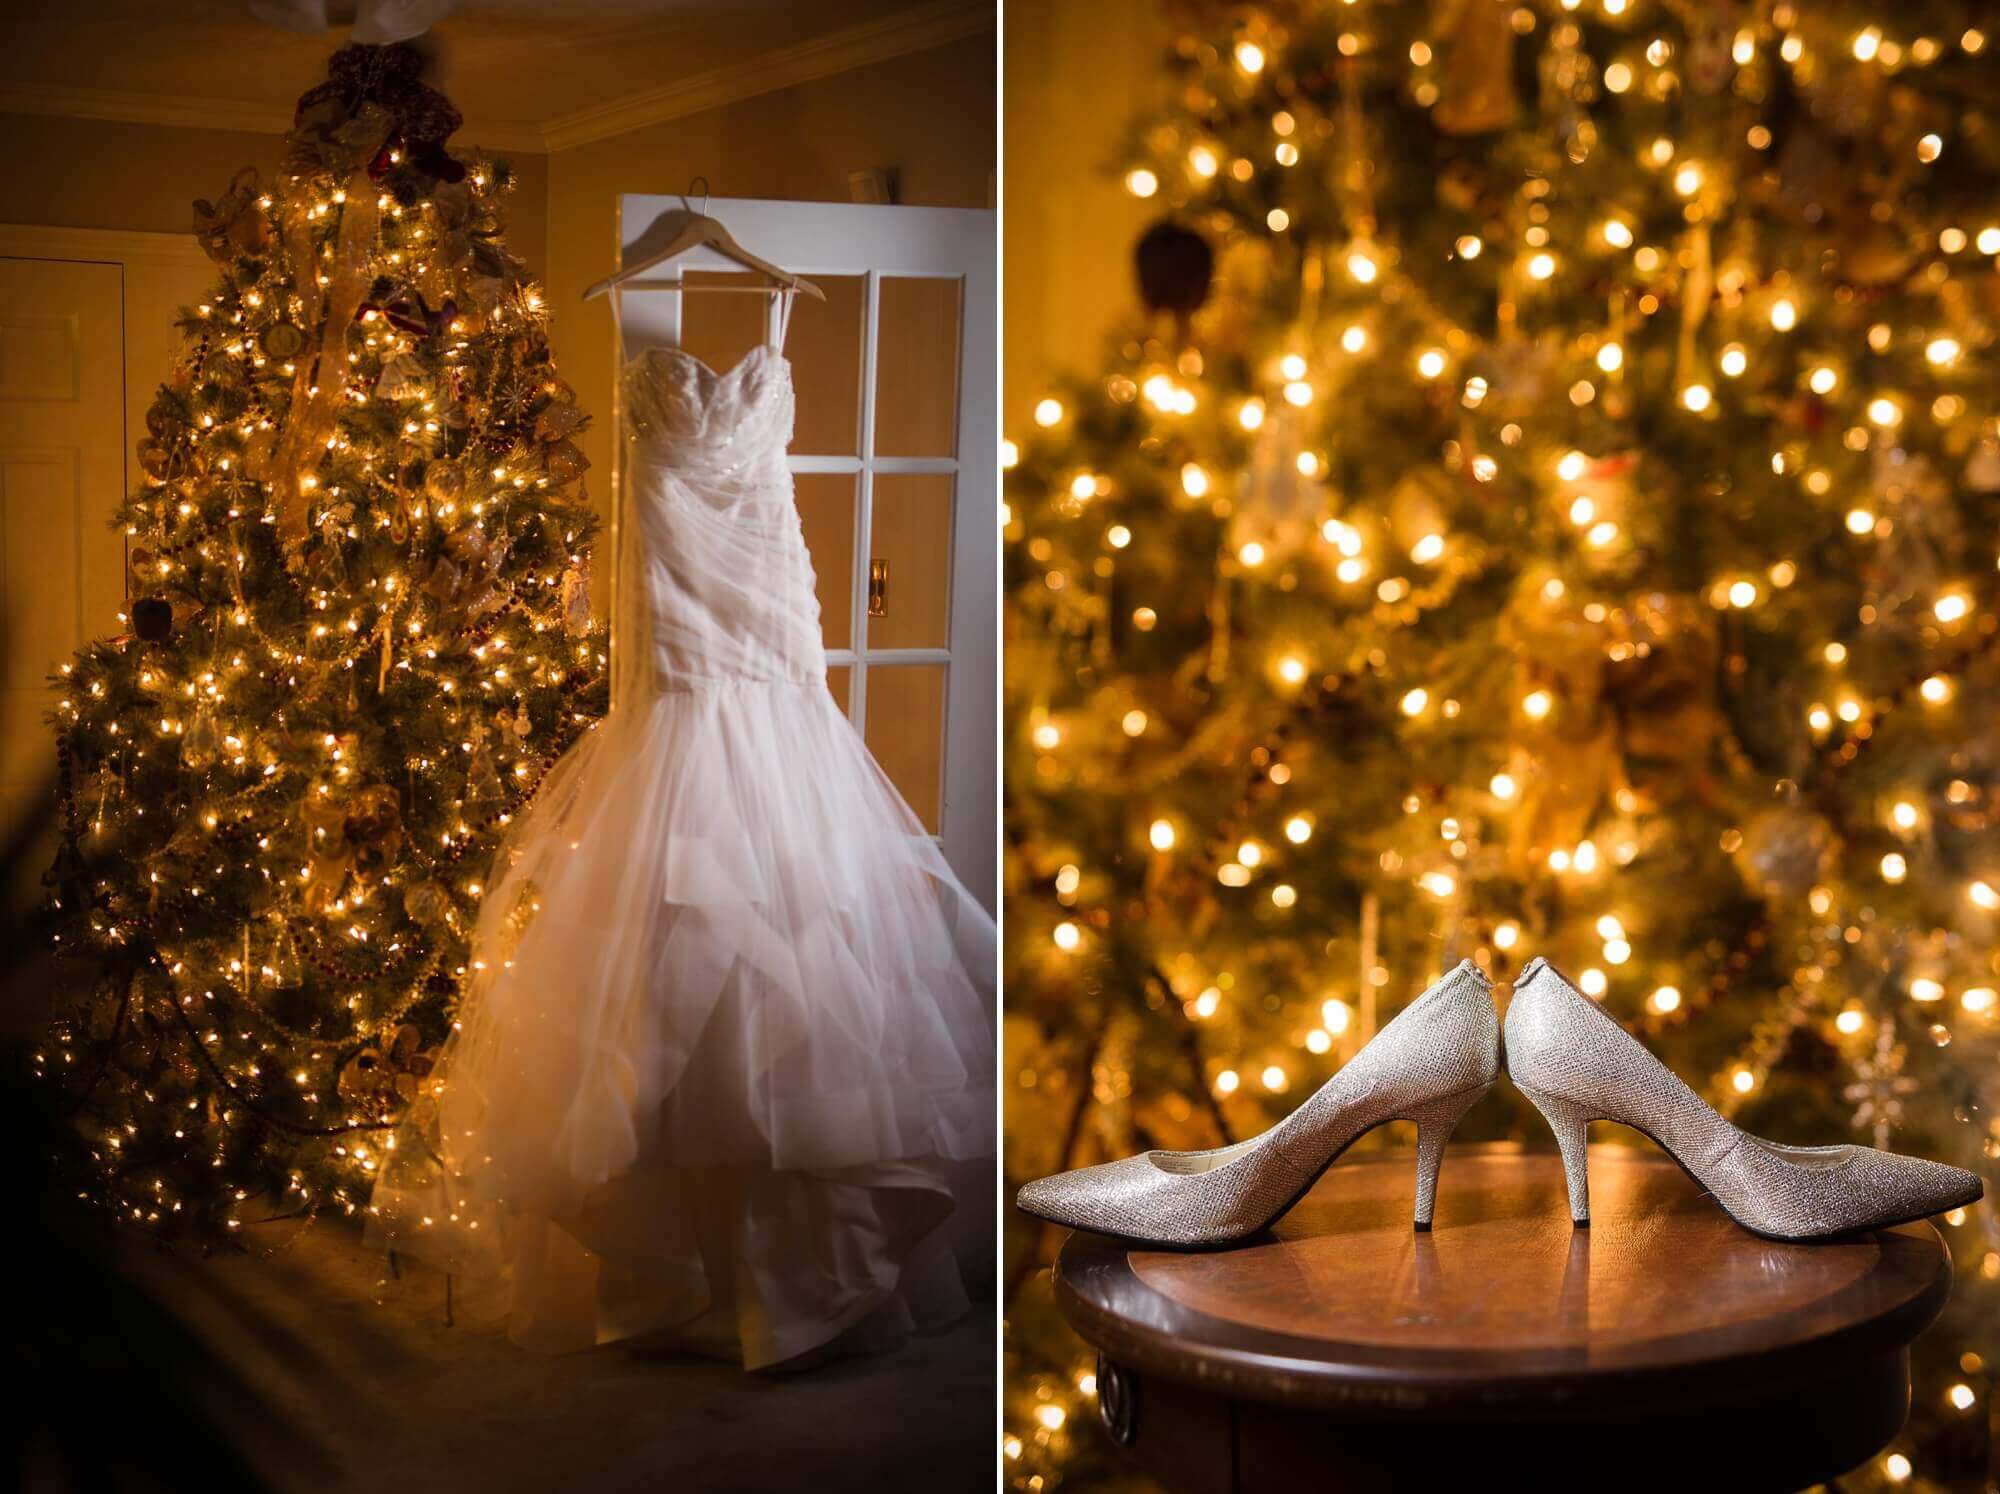 The bride's white wedding dress and white high heels illuminated in front of the Christmas tree in a Toronto home